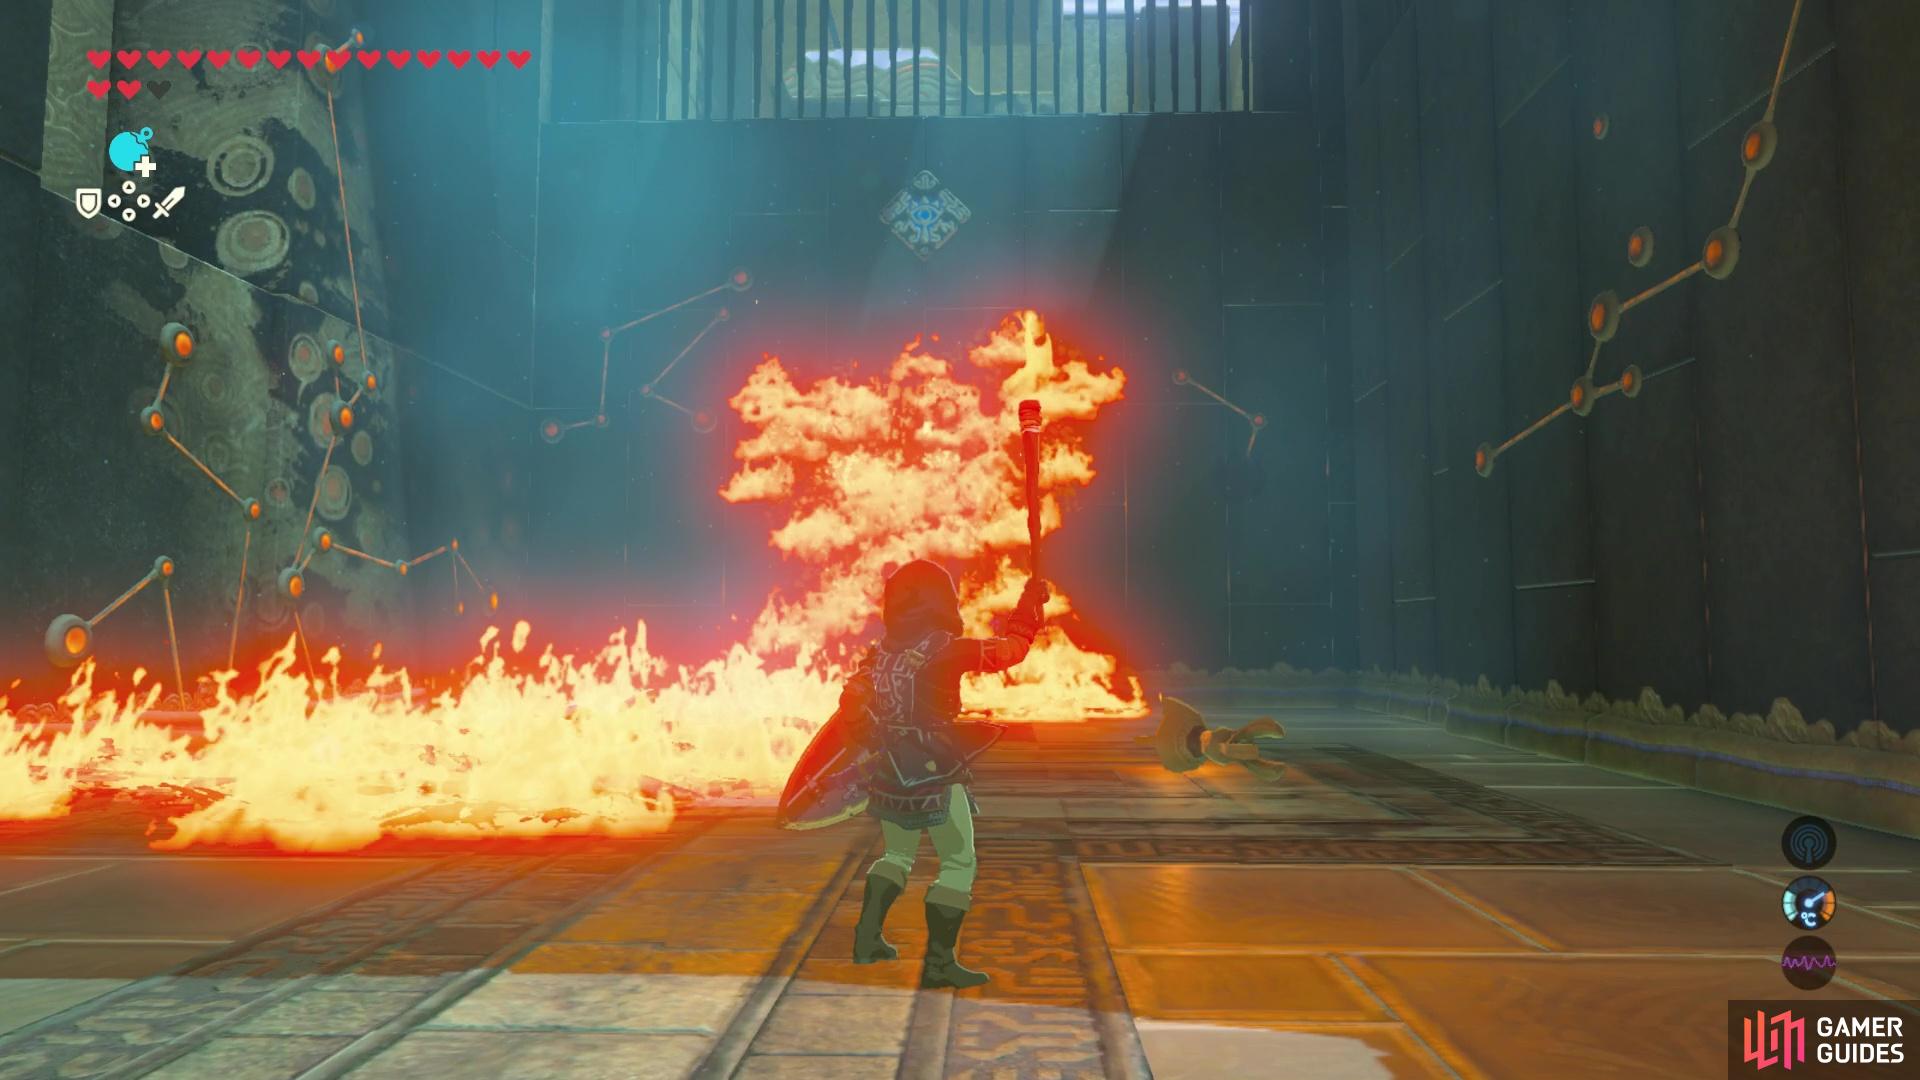 Use the fire to burn the leaves to reveal an entrance into the next area!